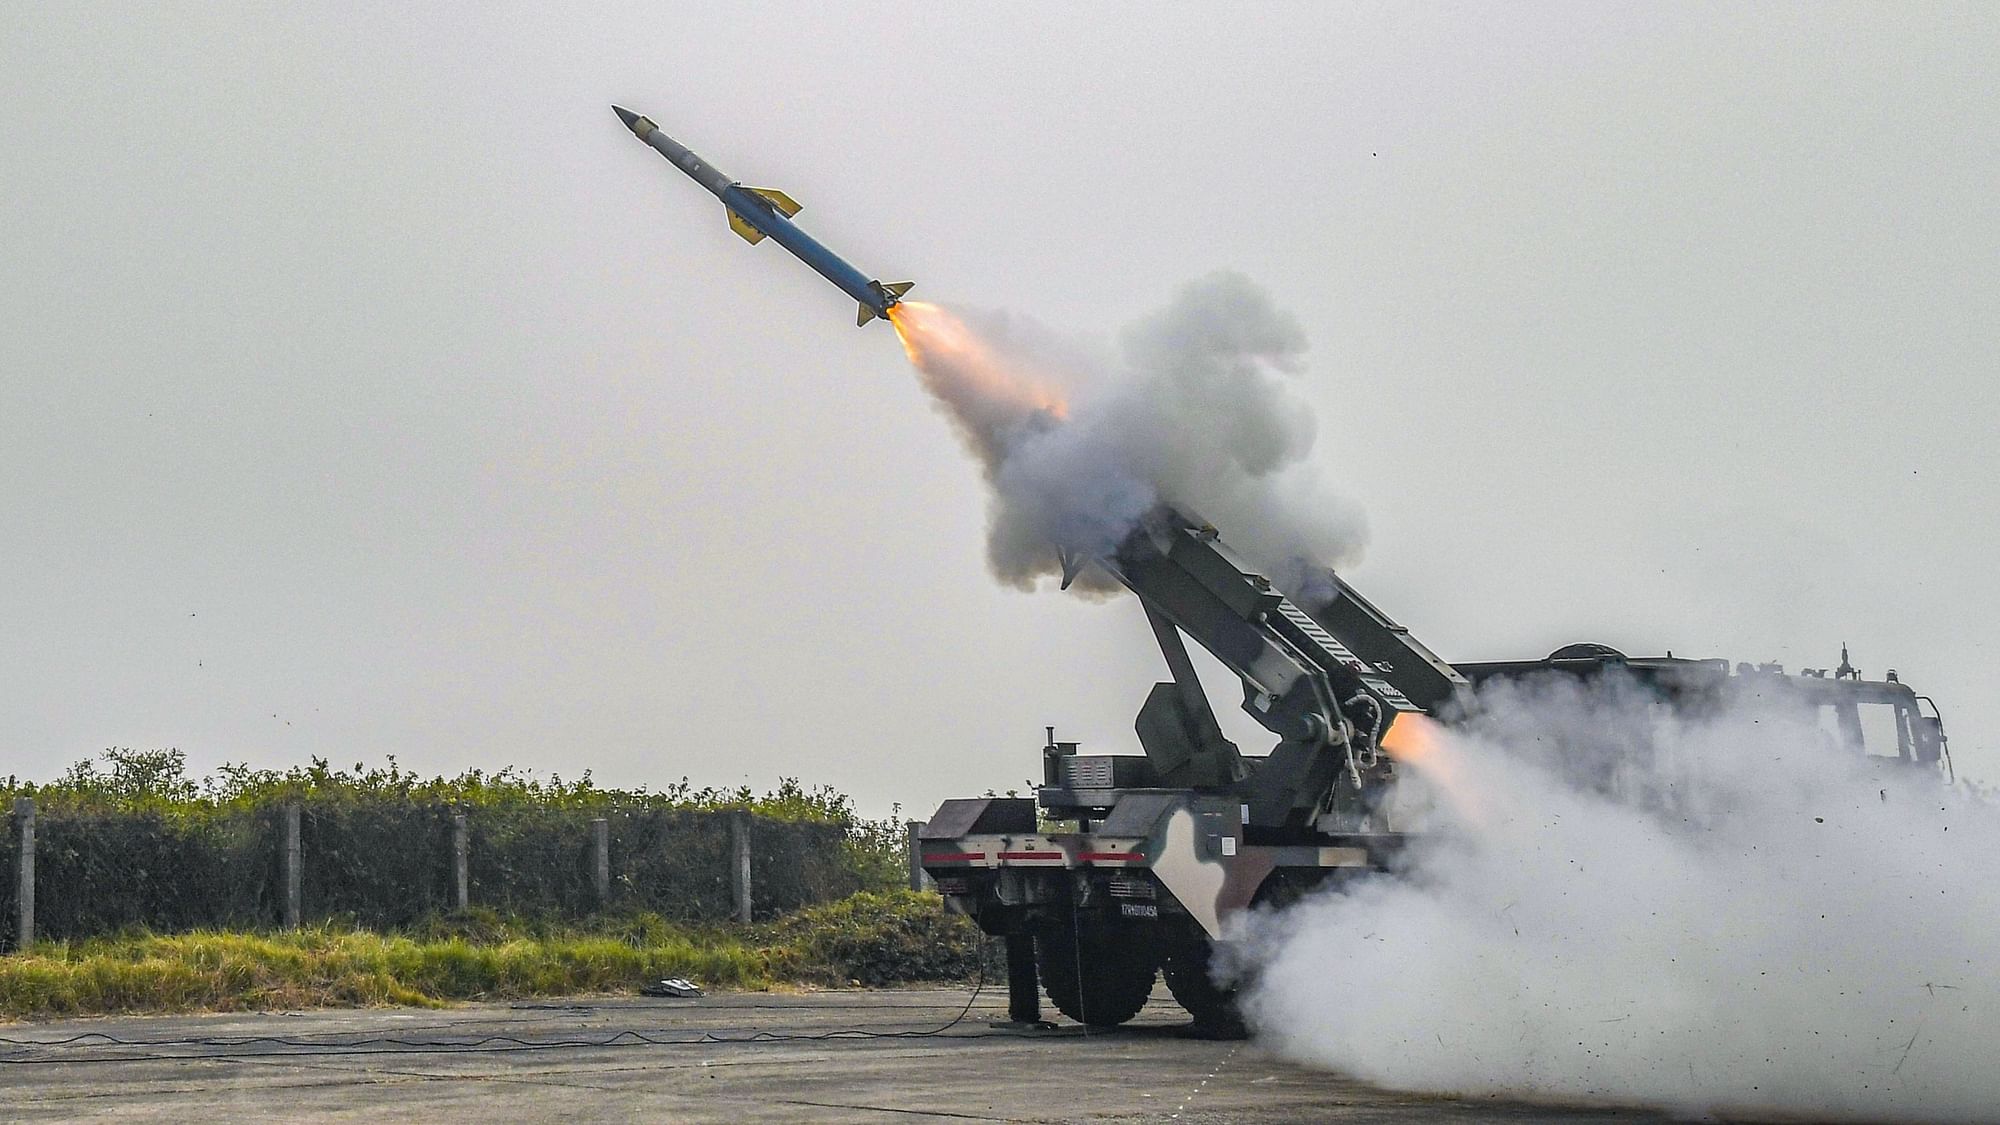 Quick Reaction Surface to Air Missile (QRSAM) system developed by Defence Research and Development Organisation (DRDO) being flight-tested from Integrated Test Range at Chandipur in Baleswar district of Odisha.